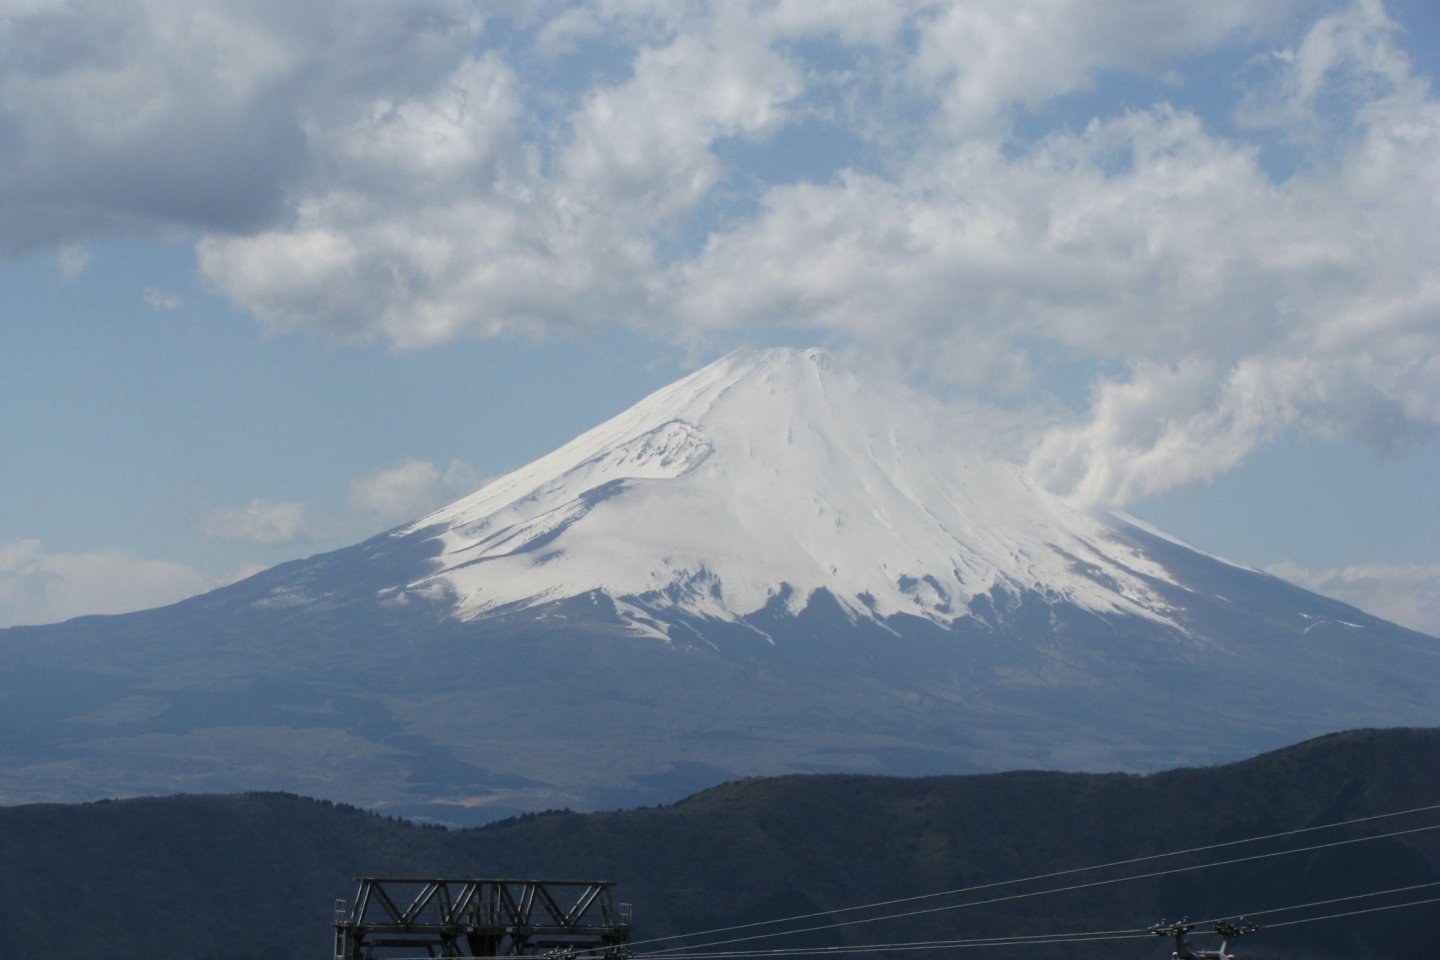 The view of Fuji-san from Owakudani Station